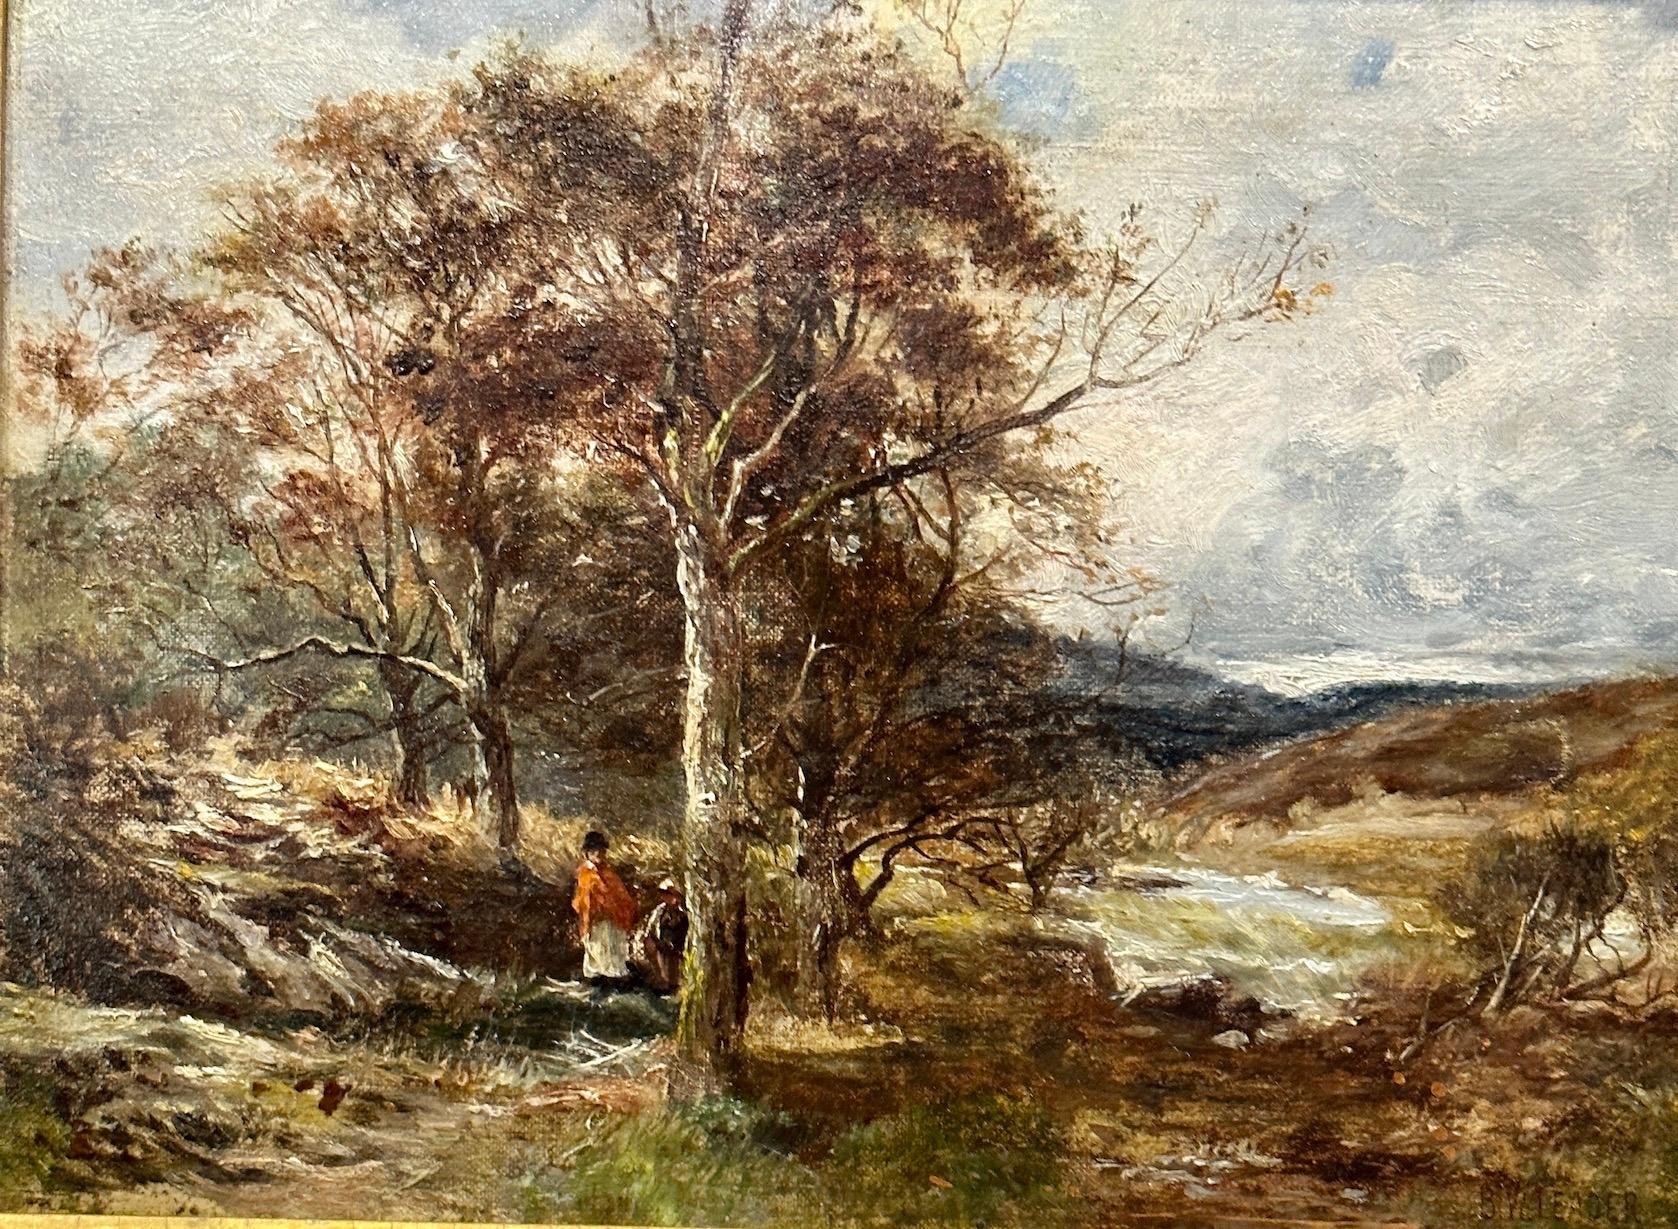 19th century Fall English landscape with figures on a path in the highlands - Painting by Benjamin Williams Leader